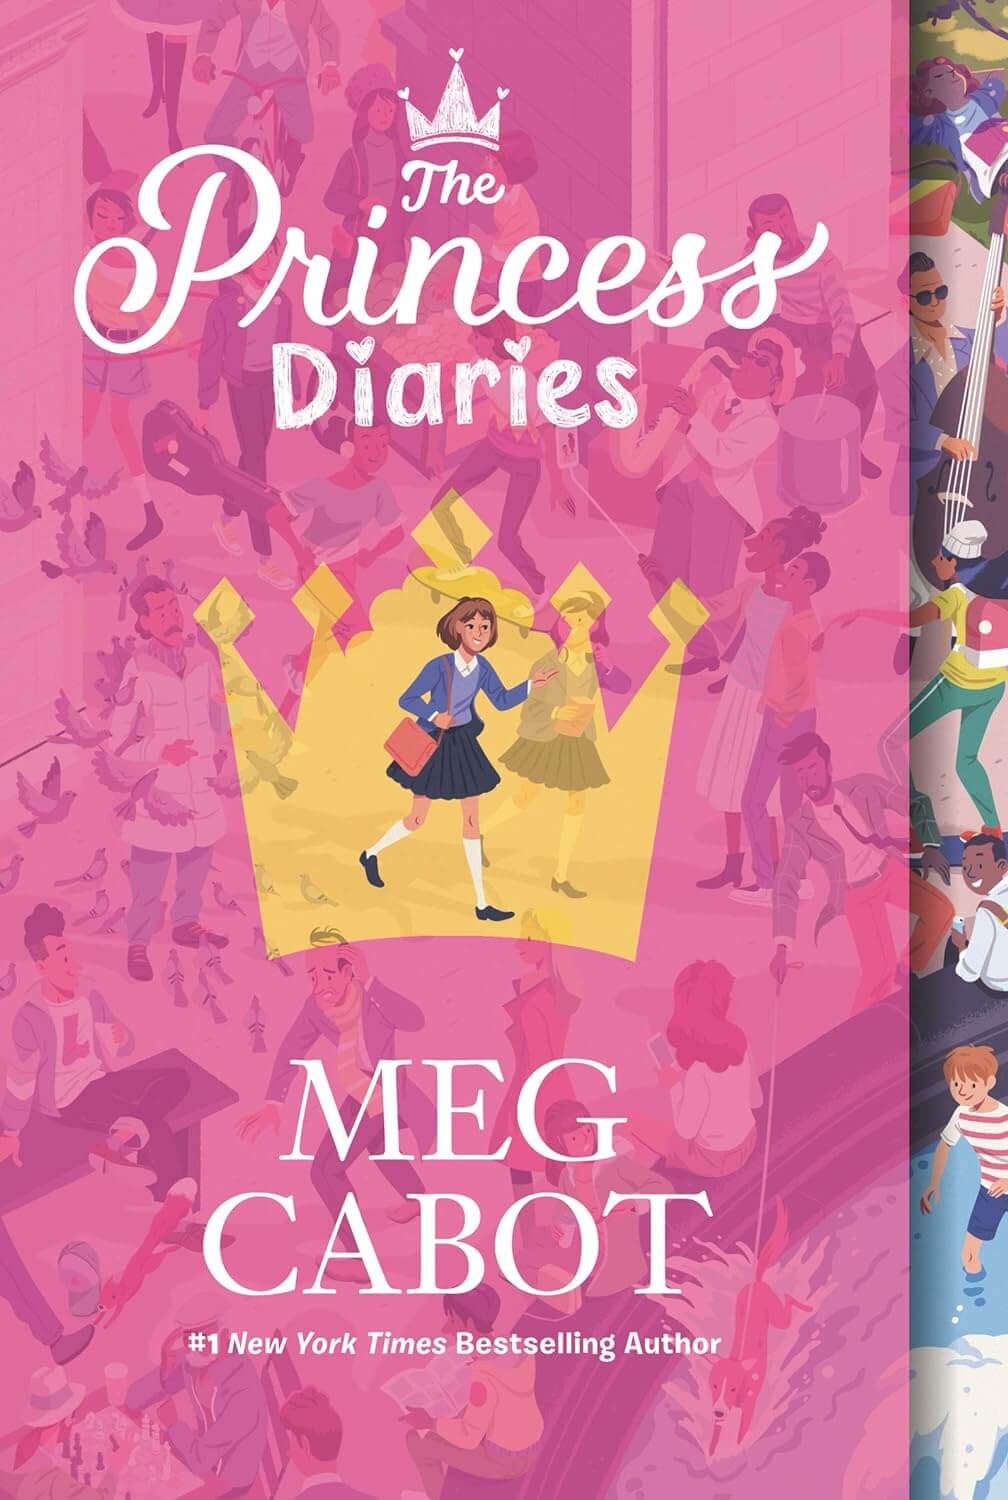 "The Princess Diaries" by Meg Cabot